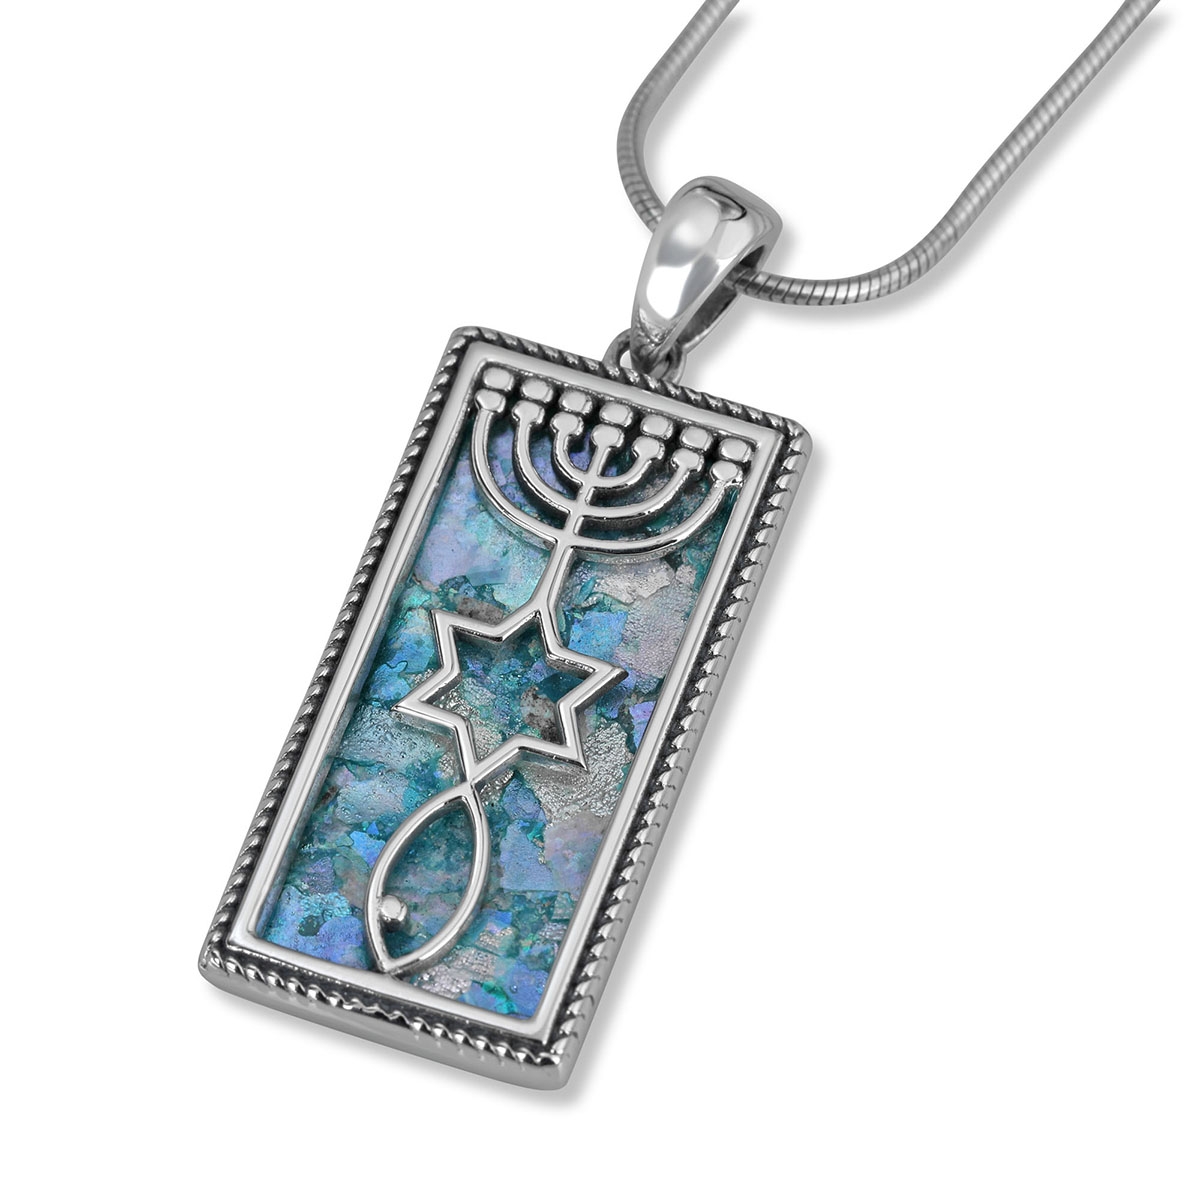 Rectangular Sterling Silver and Roman Glass Filigree Grafted-In Messianic Seal Necklace - 1